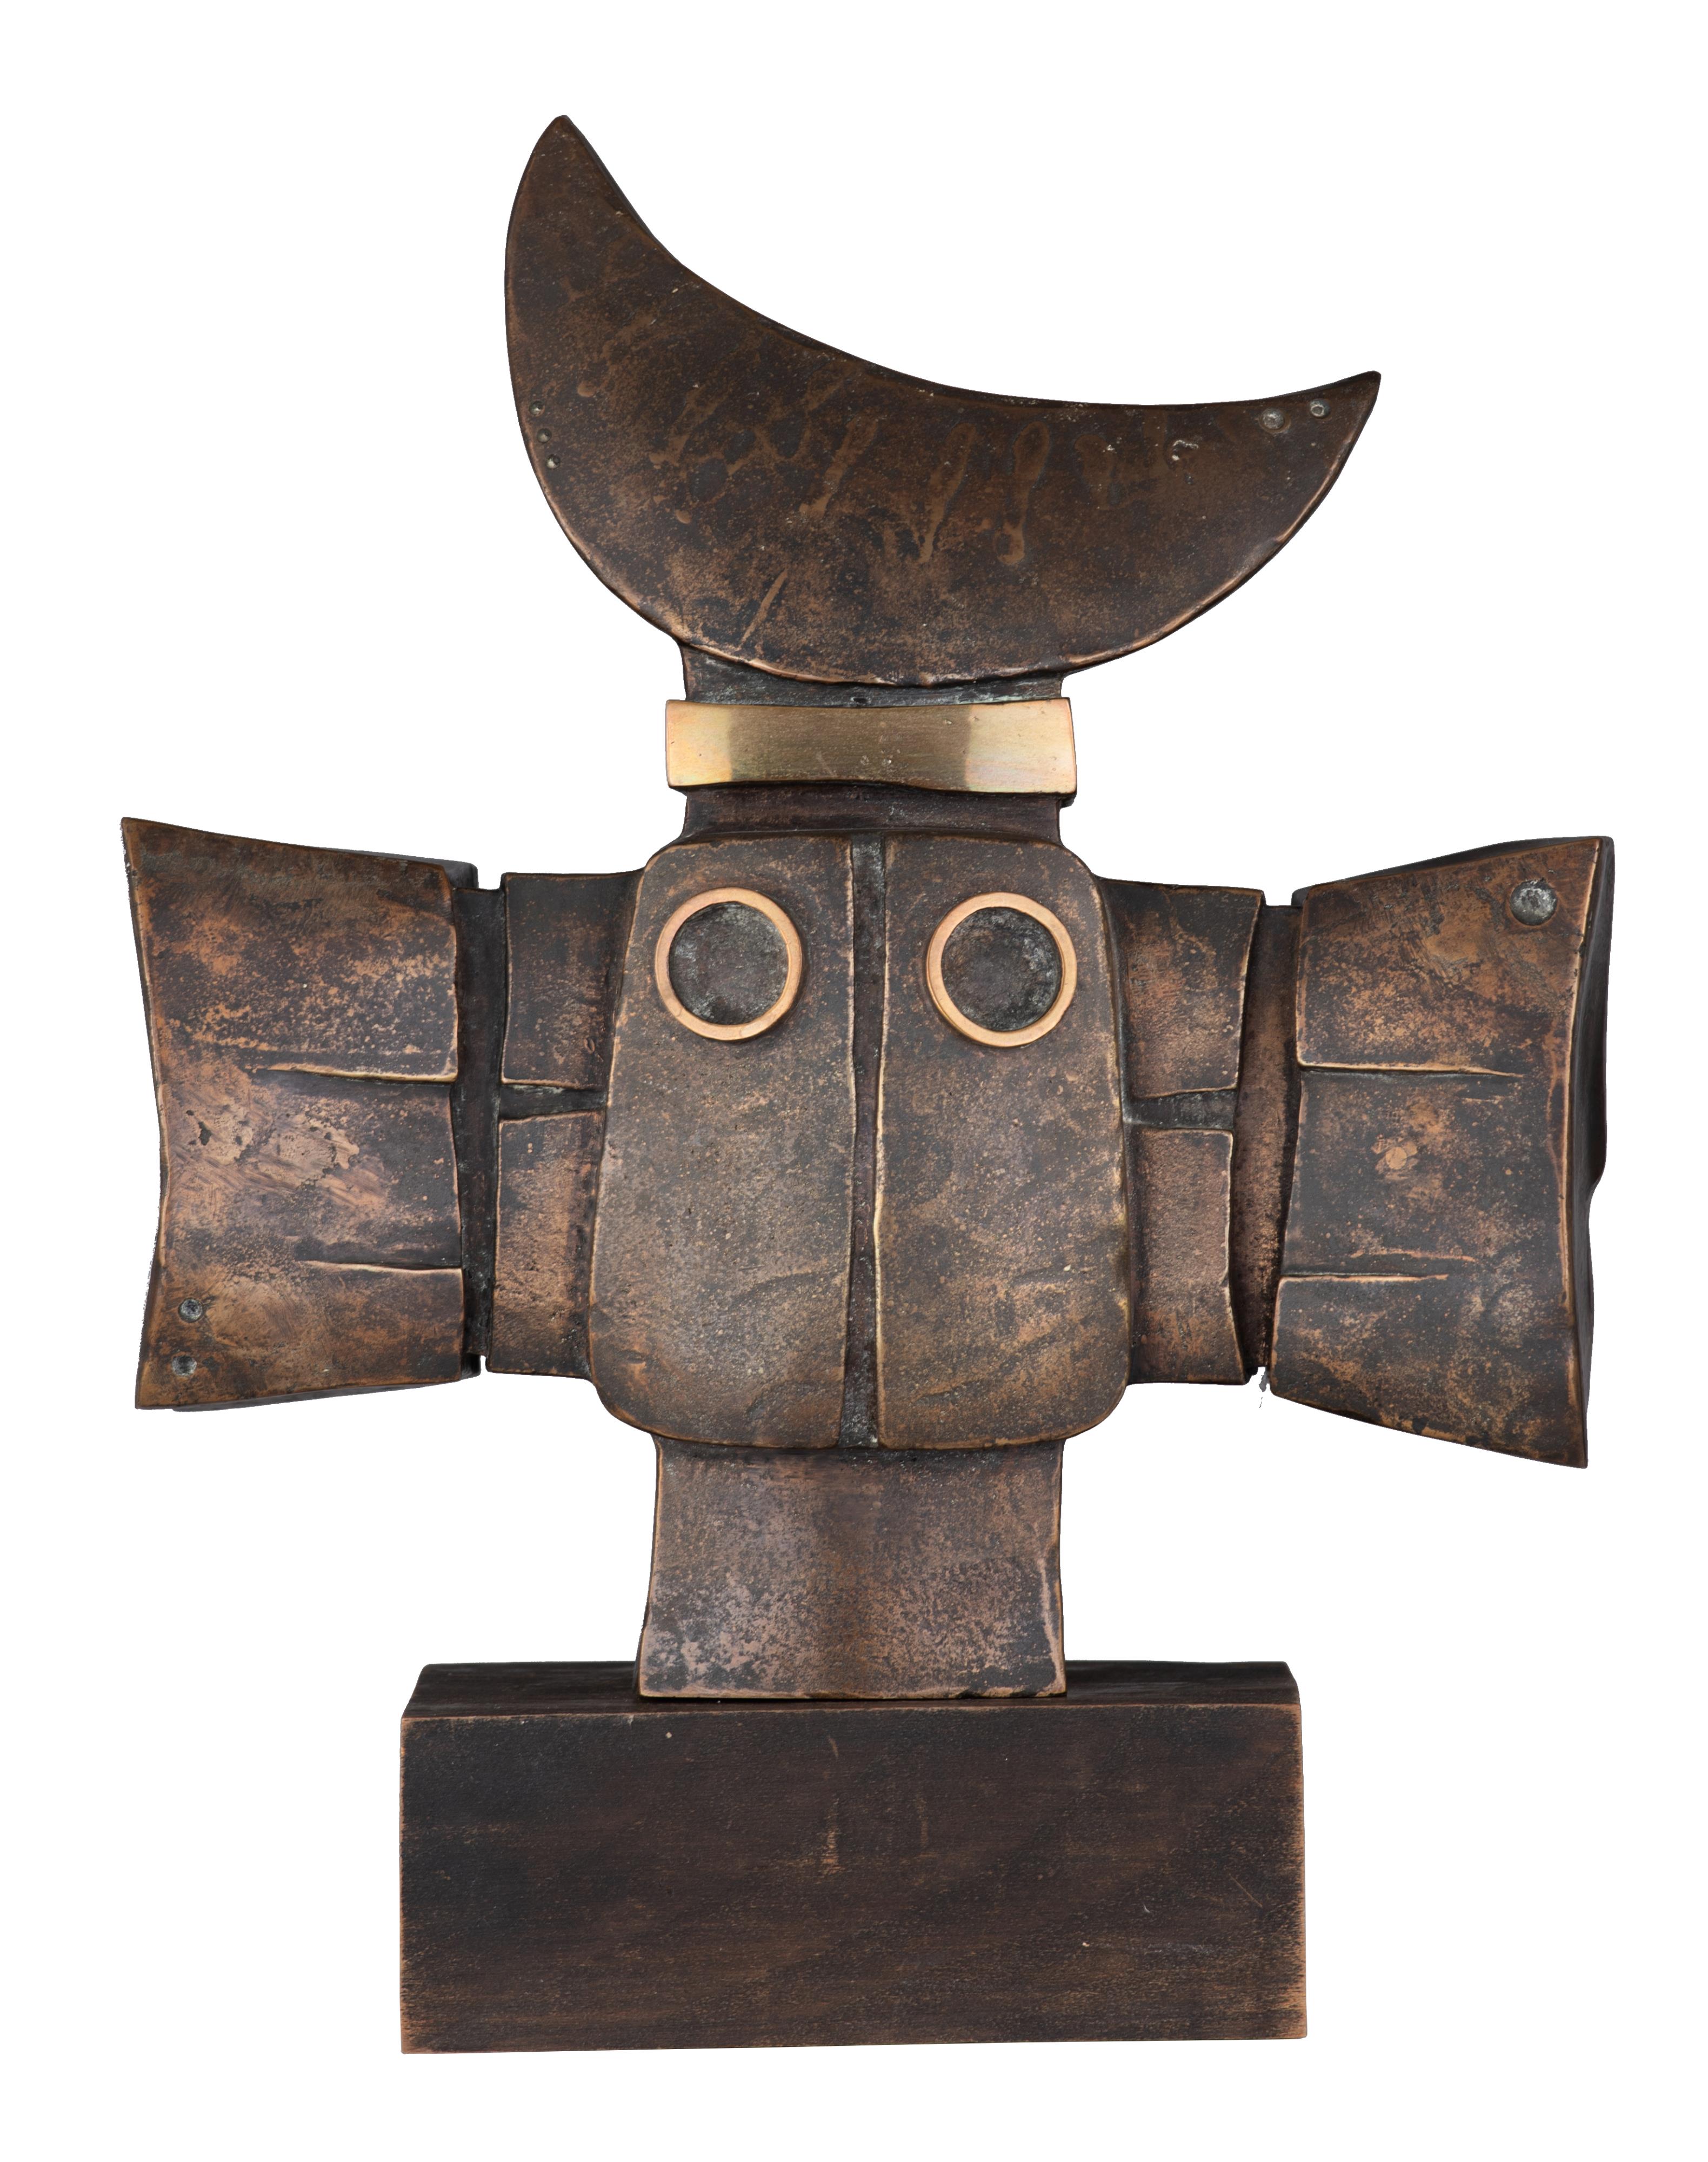 Minnebo H., 'the Moon', dated (19)73, Nø 1/1, patinated bronze on a patinated wooden base, H 28,5 -